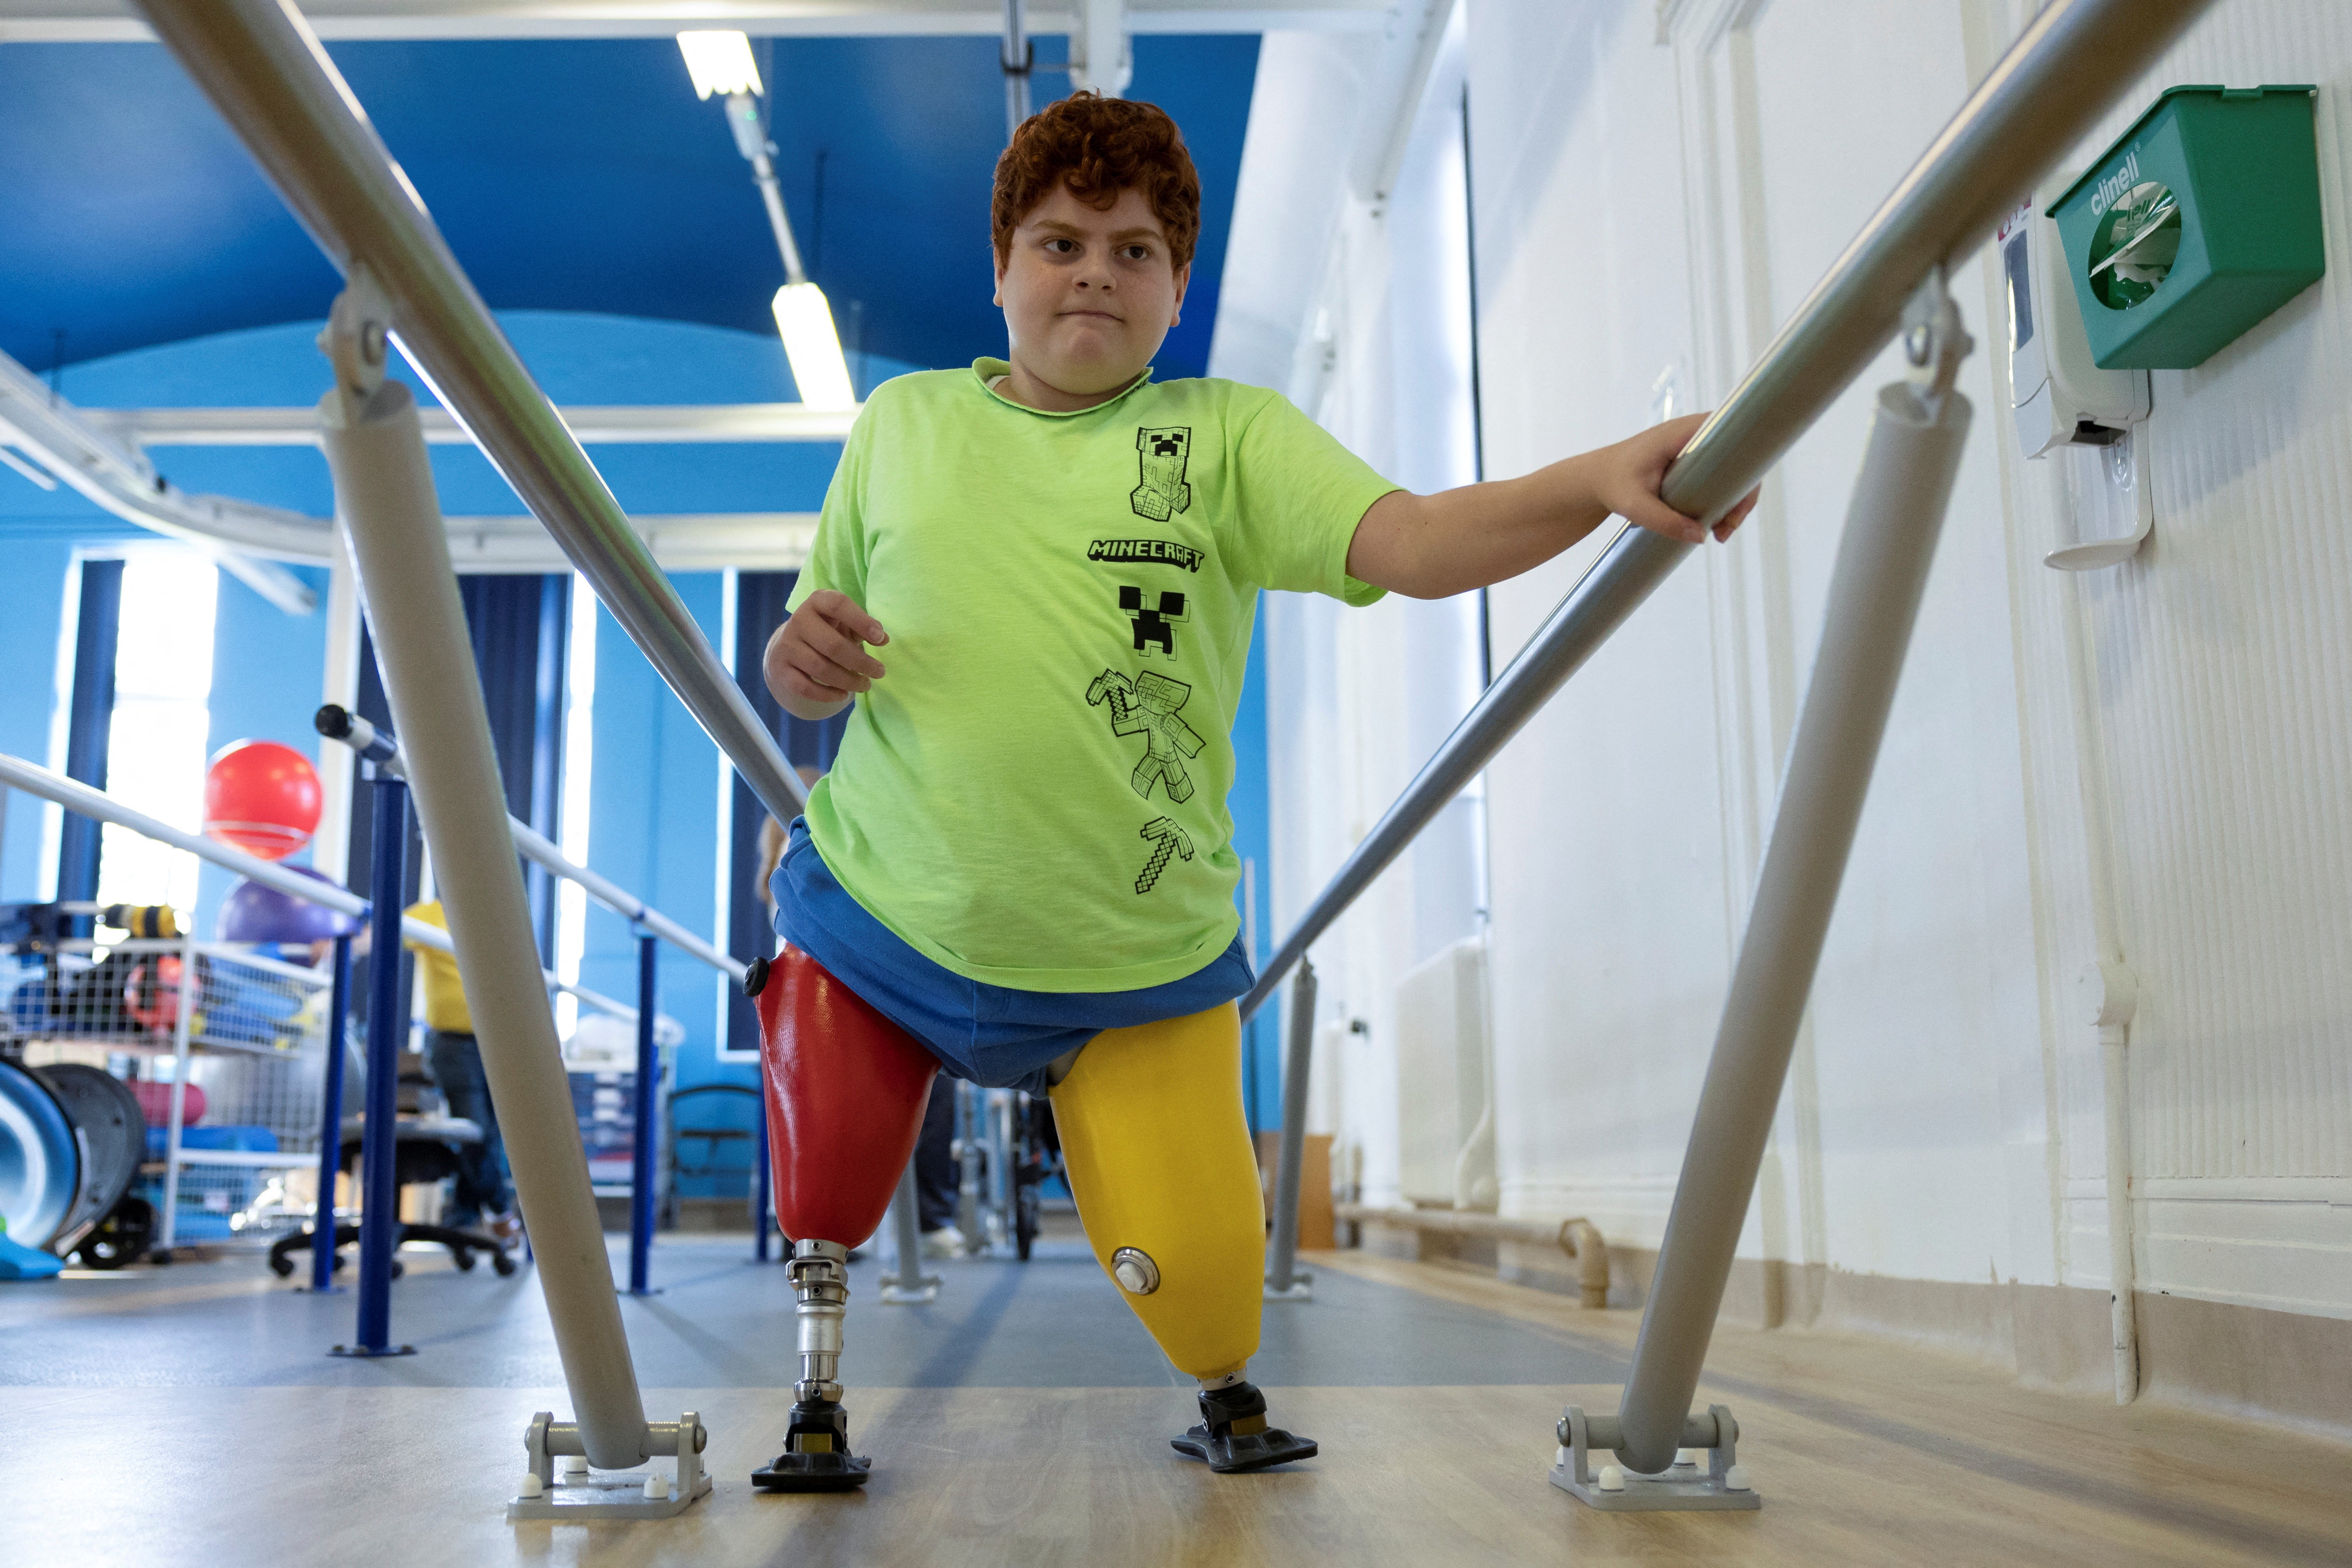 Mehmet, uses physiotherapy bars at the Royal National Orthopaedic Hospital during a prosthetics fitting session